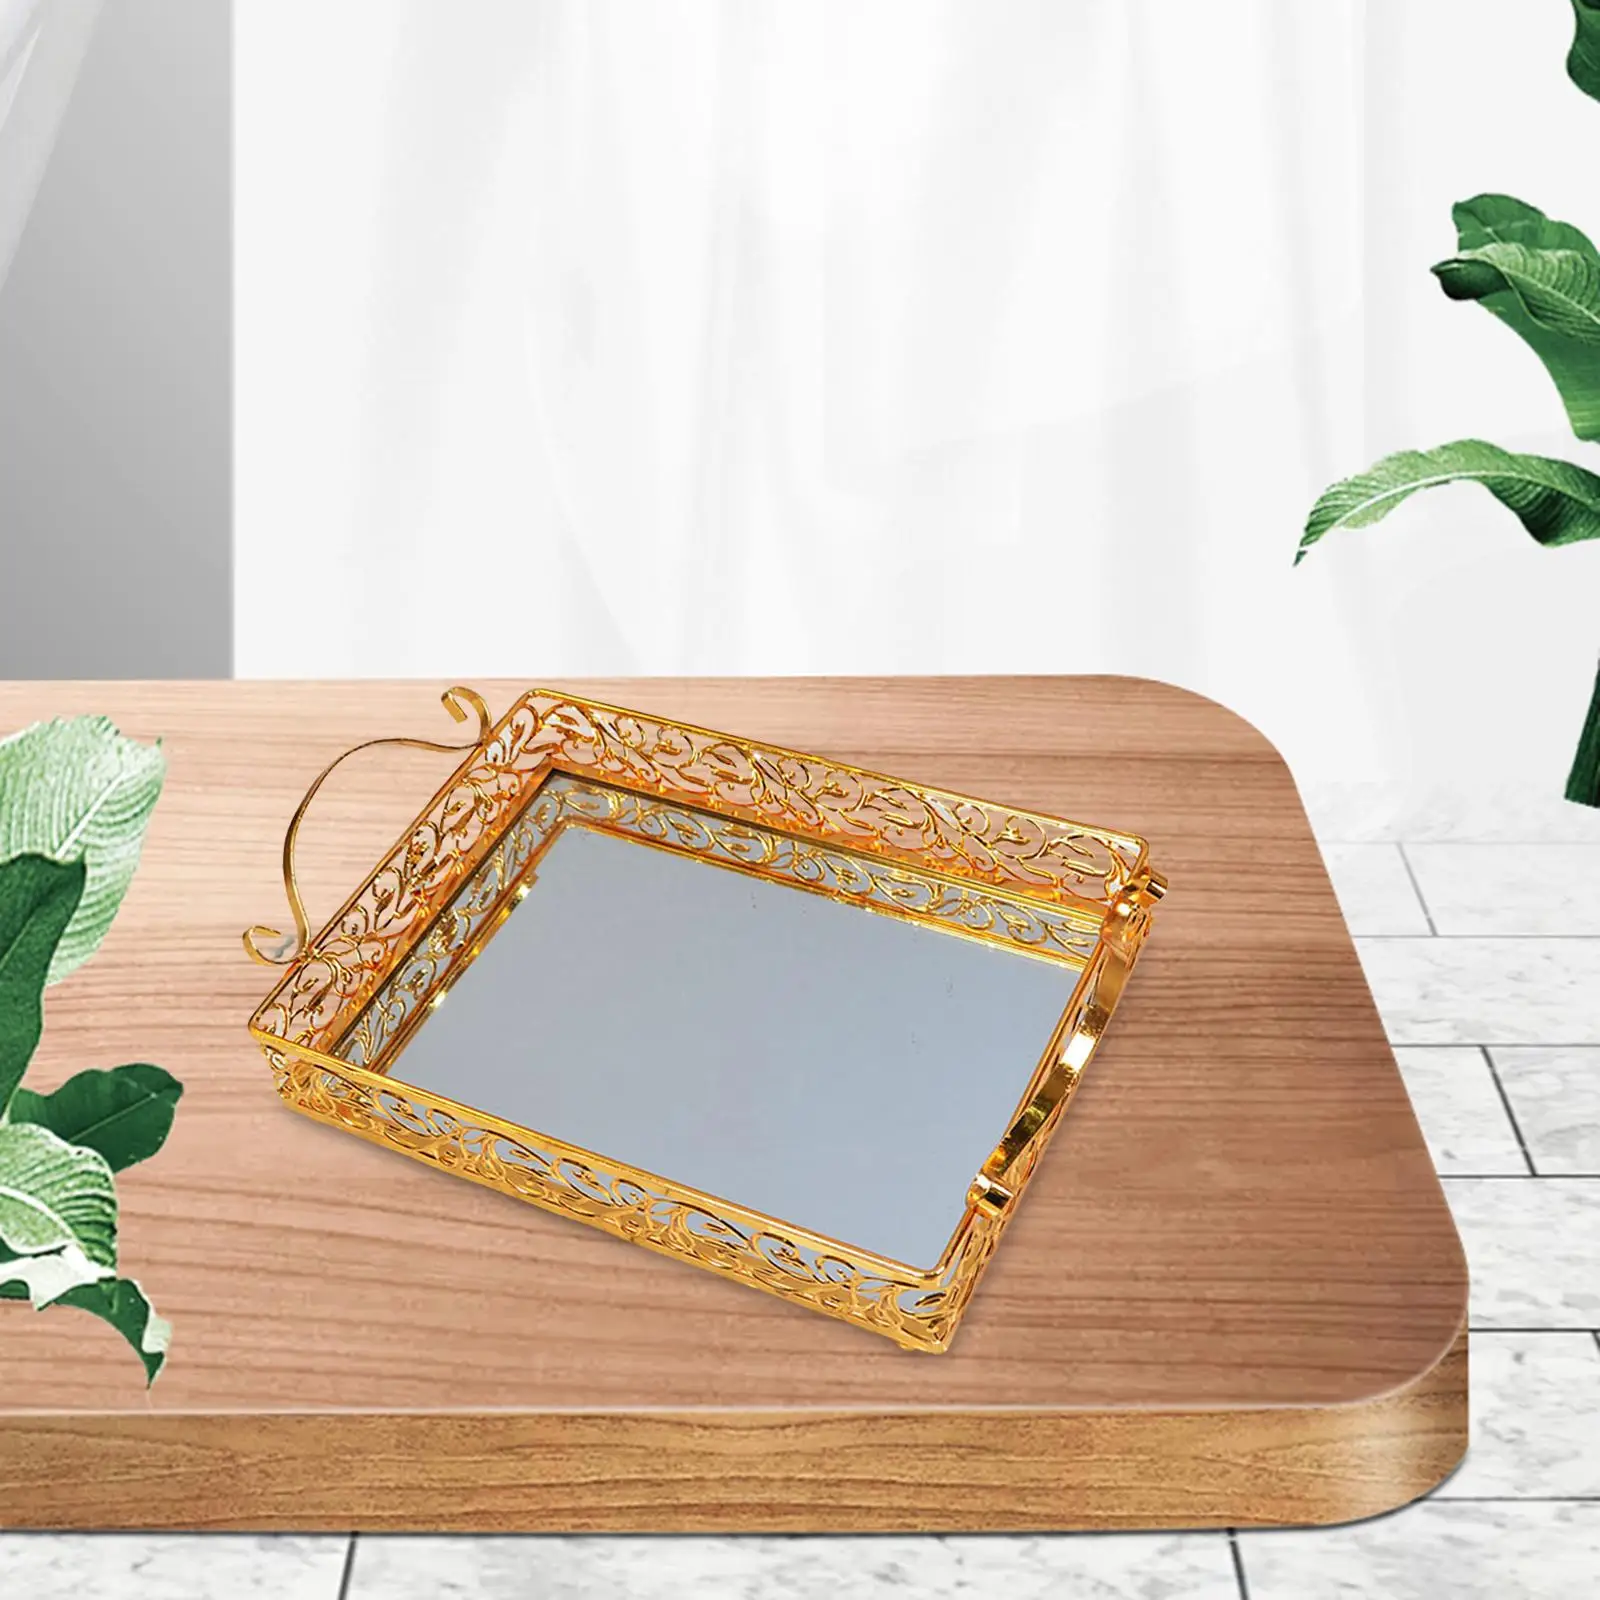 Mirror Decorative Tray with Side Rails Storage Tray Ornate Dresser Organizer Tray for Countertop Home Bedroom Living Room Decor